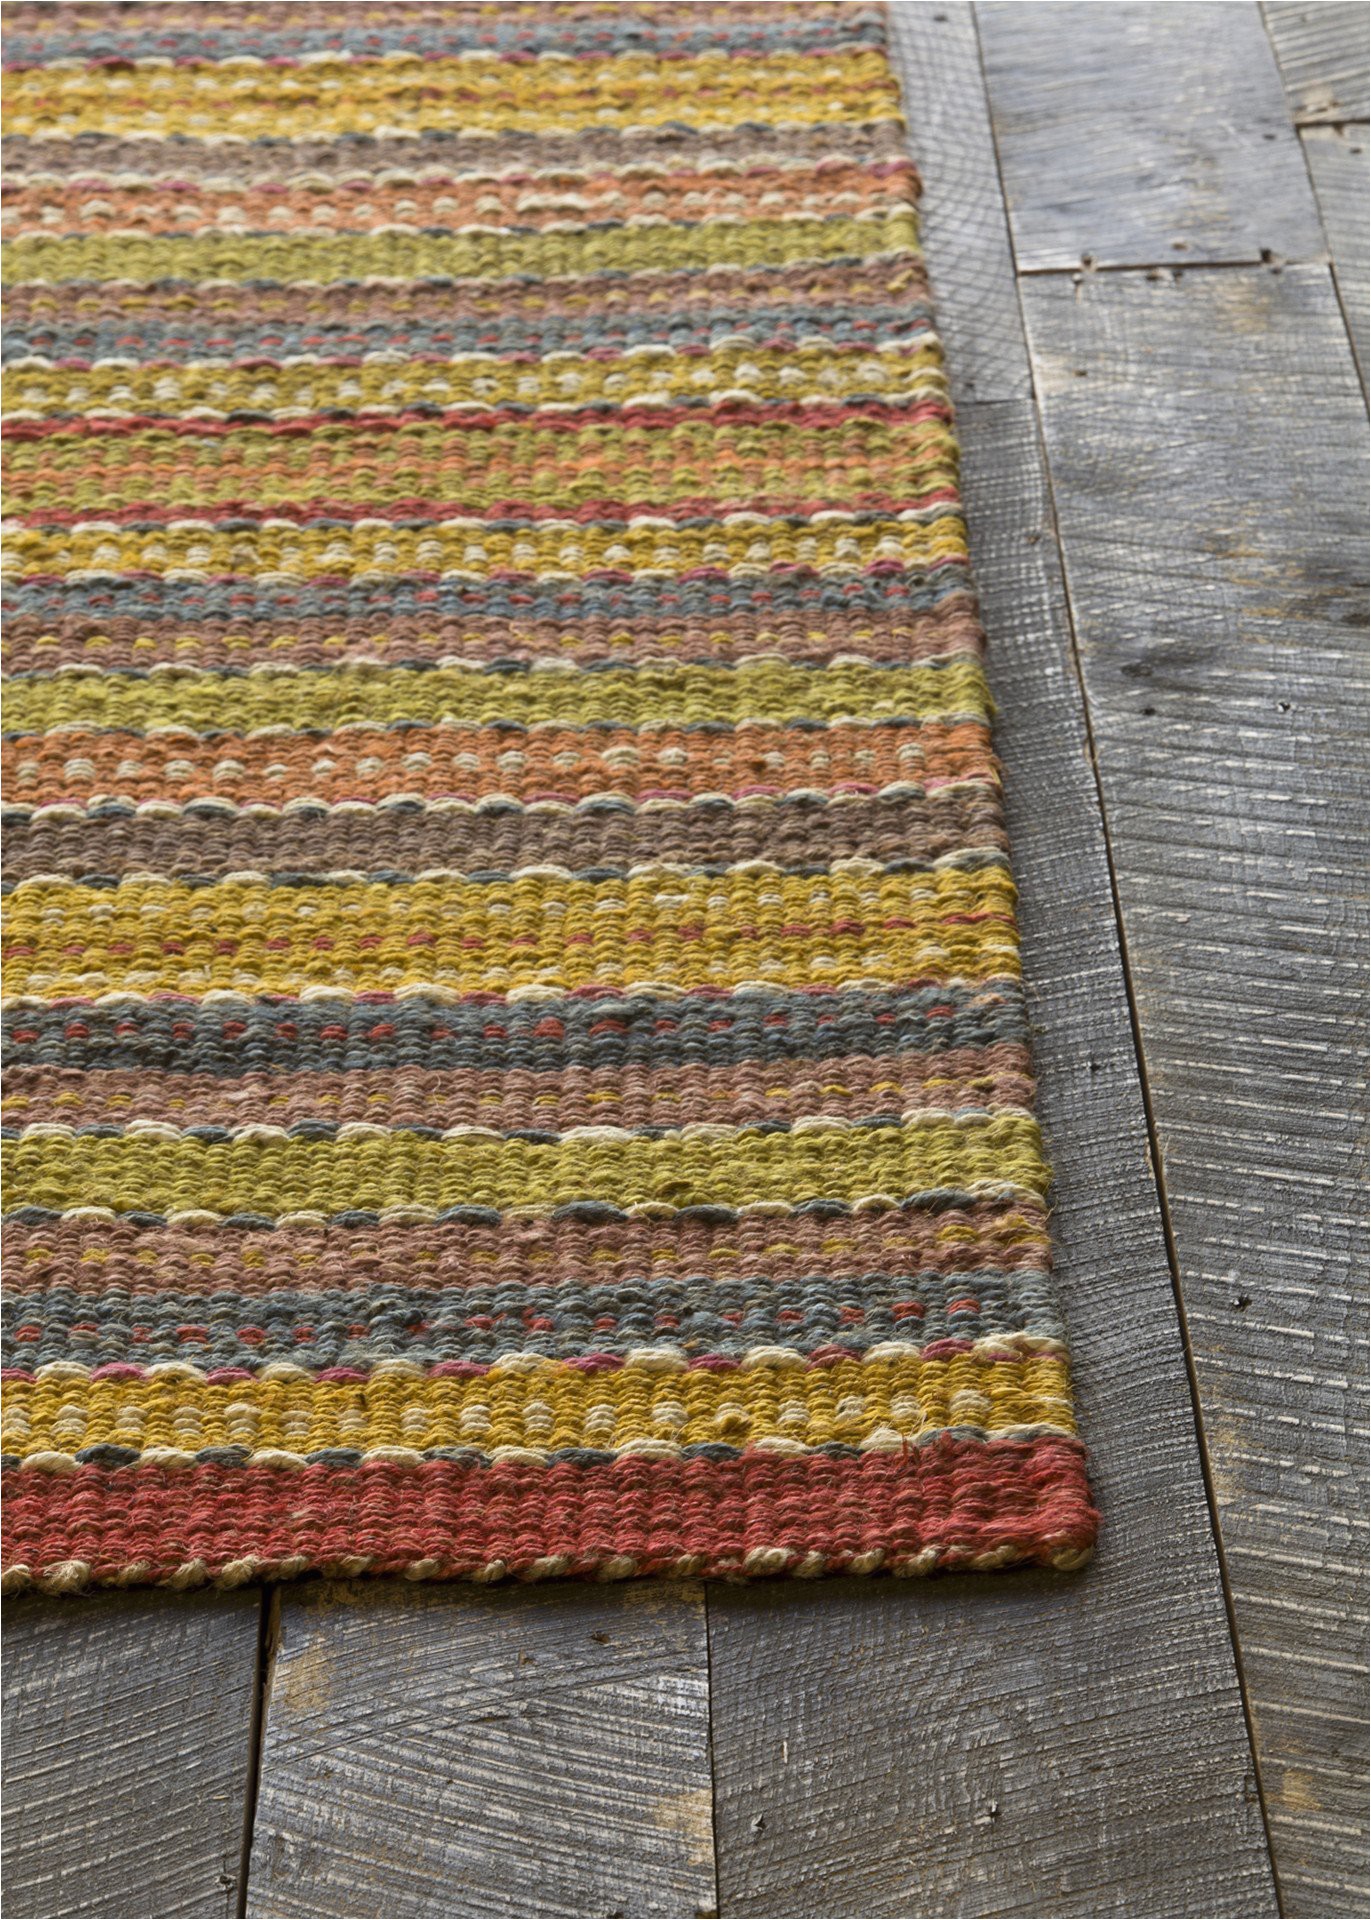 Blue Green Brown area Rugs Saket Collection Hand Woven area Rug In Brown Red Blue & Green